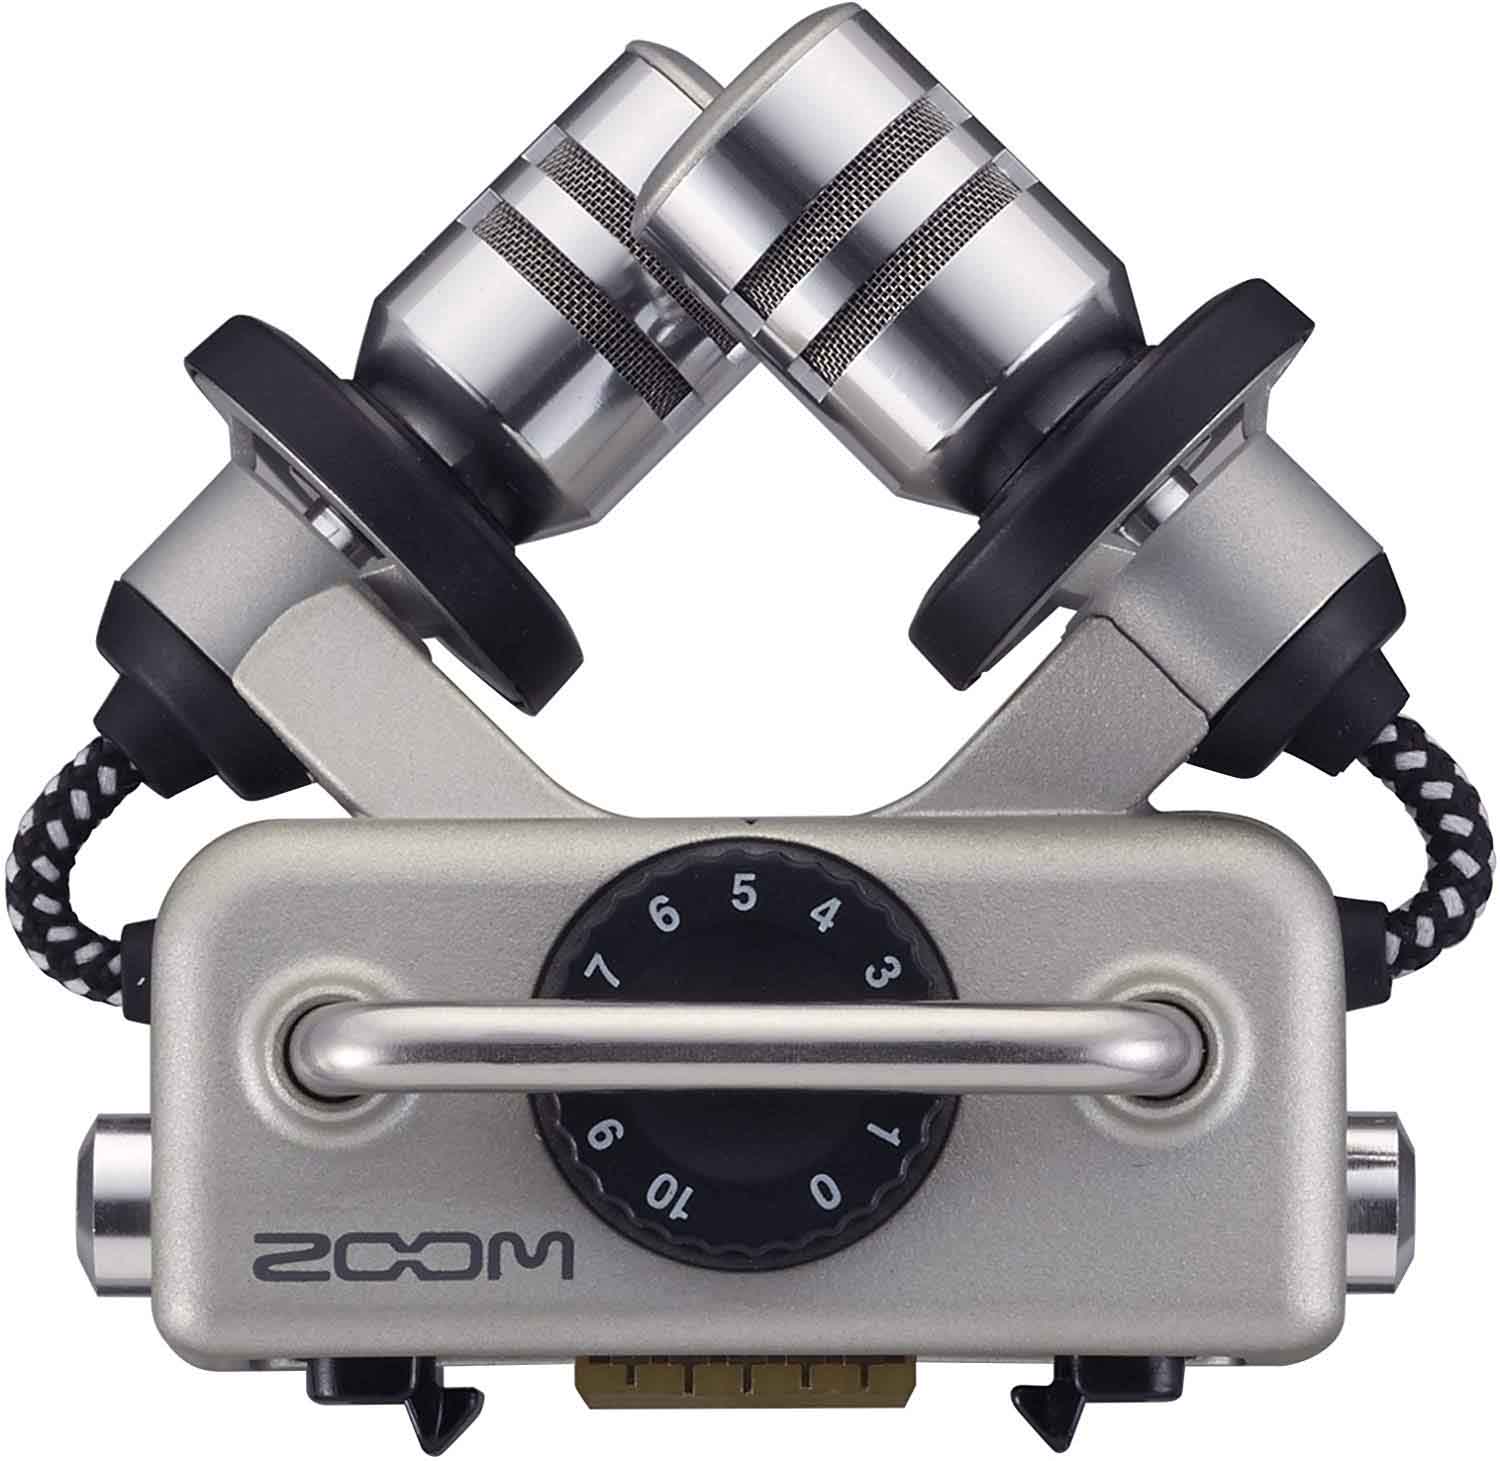 Zoom XYH-5 Shock Mounted Stereo Microphone Capsule - Hollywood DJ